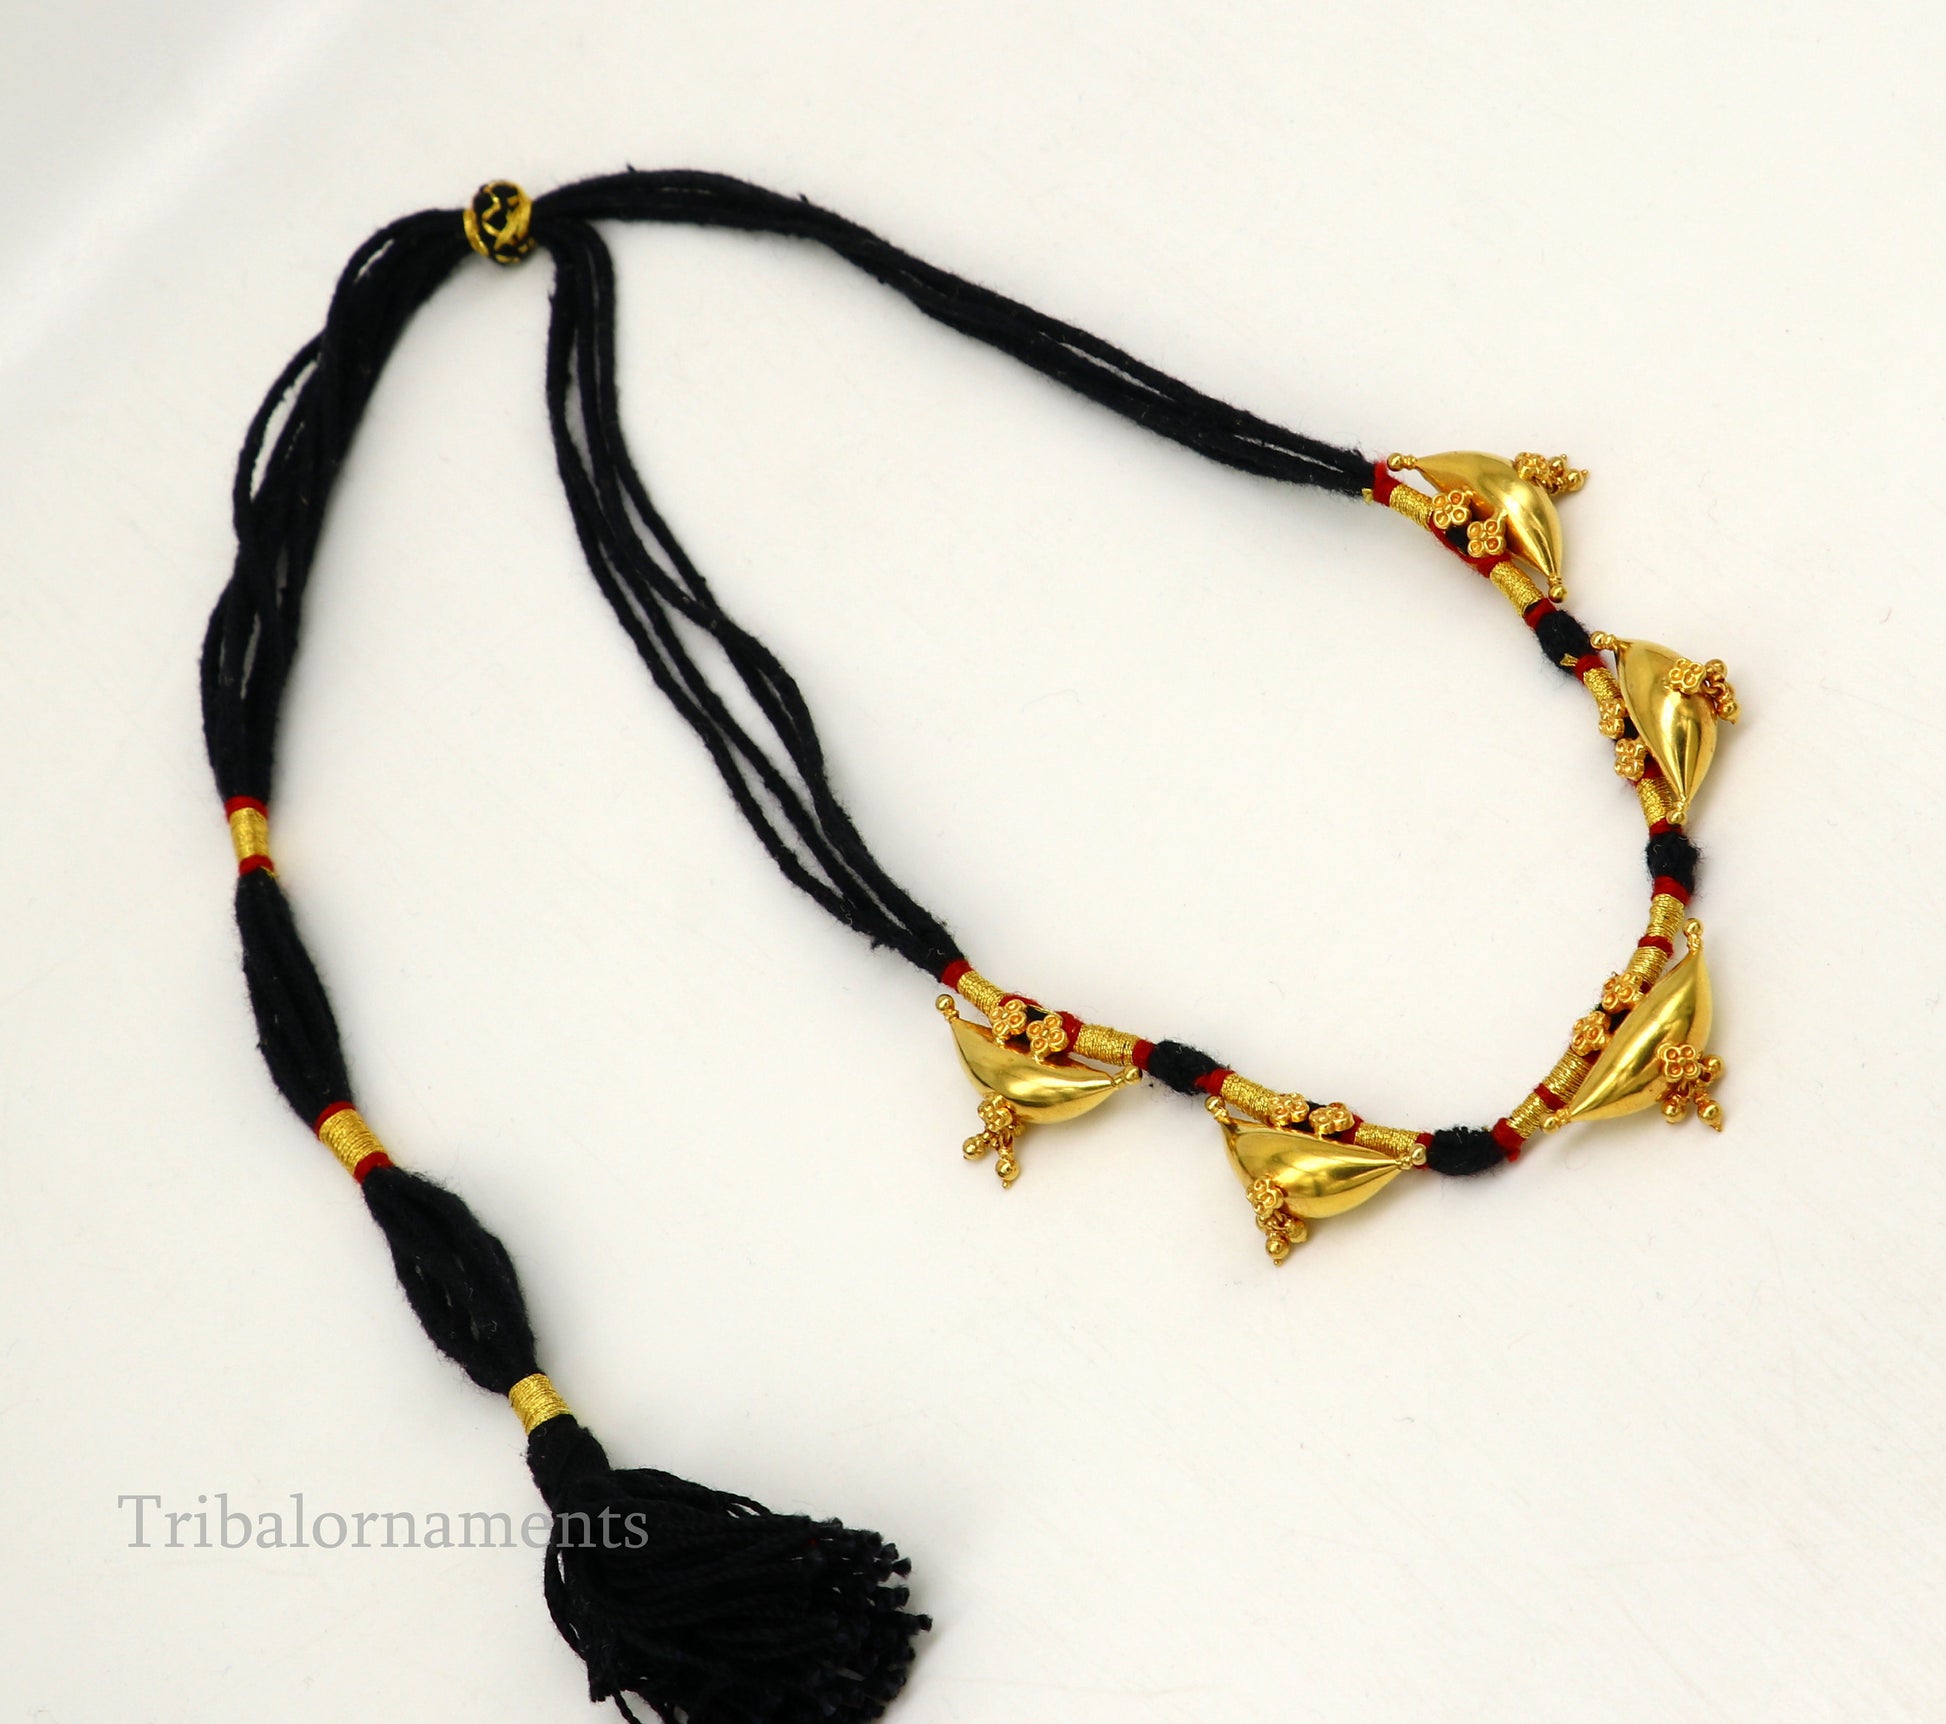 22kt yellow gold customized vintage tribal choker necklace, best gift ethnic necklace worn by tribal people of Rajasthan india  set74 - TRIBAL ORNAMENTS